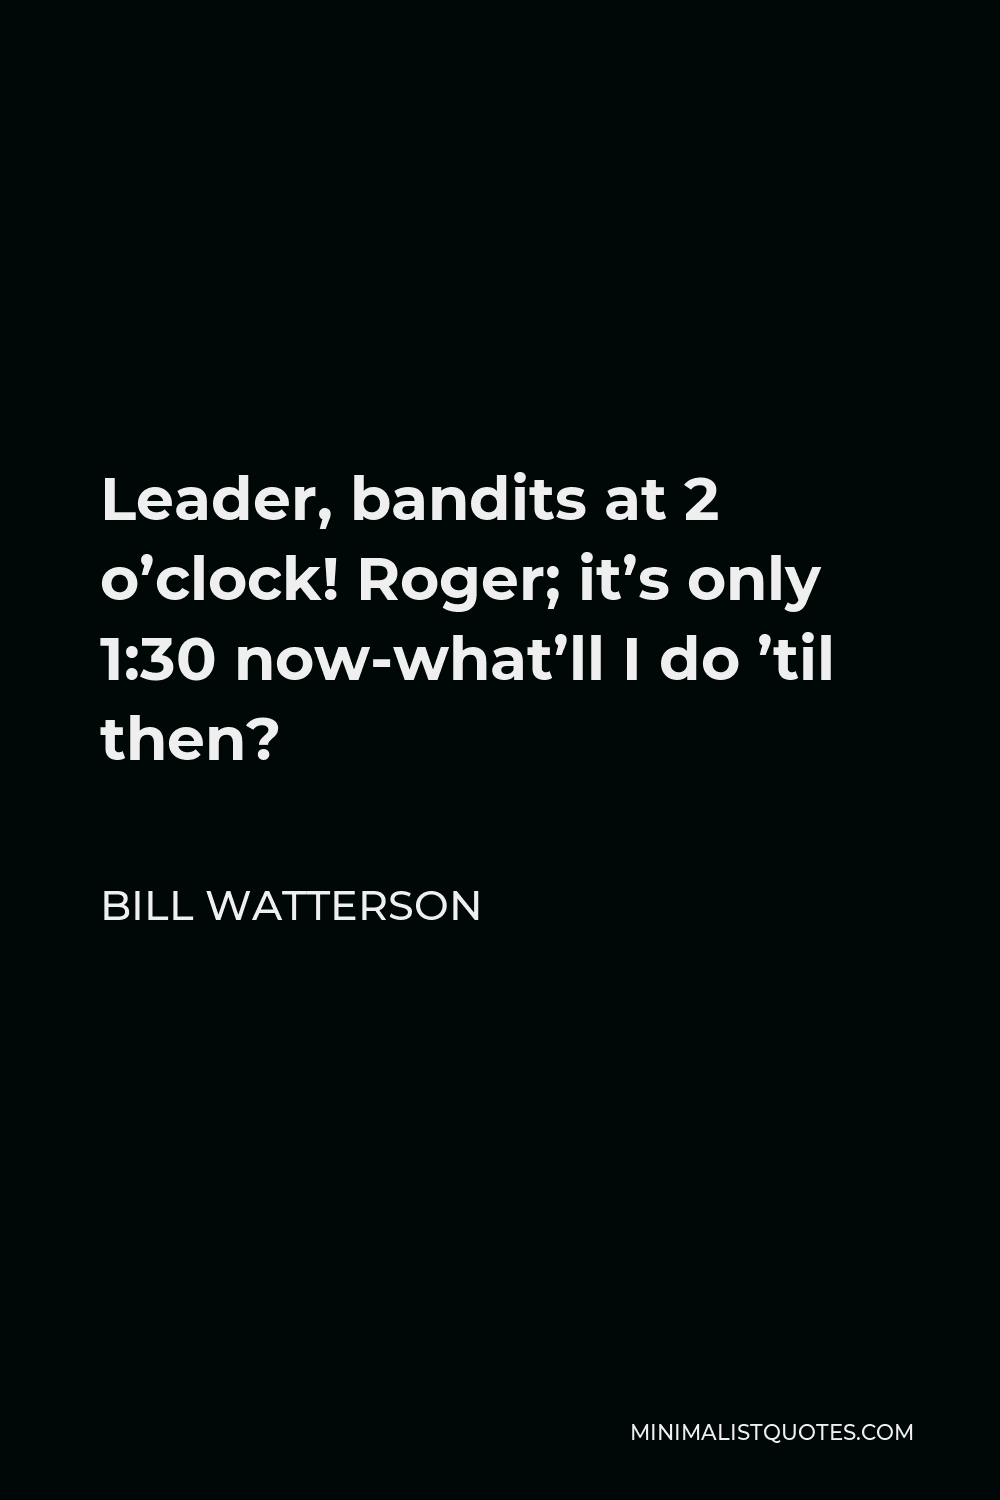 Bill Watterson Quote - Leader, bandits at 2 o’clock! Roger; it’s only 1:30 now-what’ll I do ’til then?